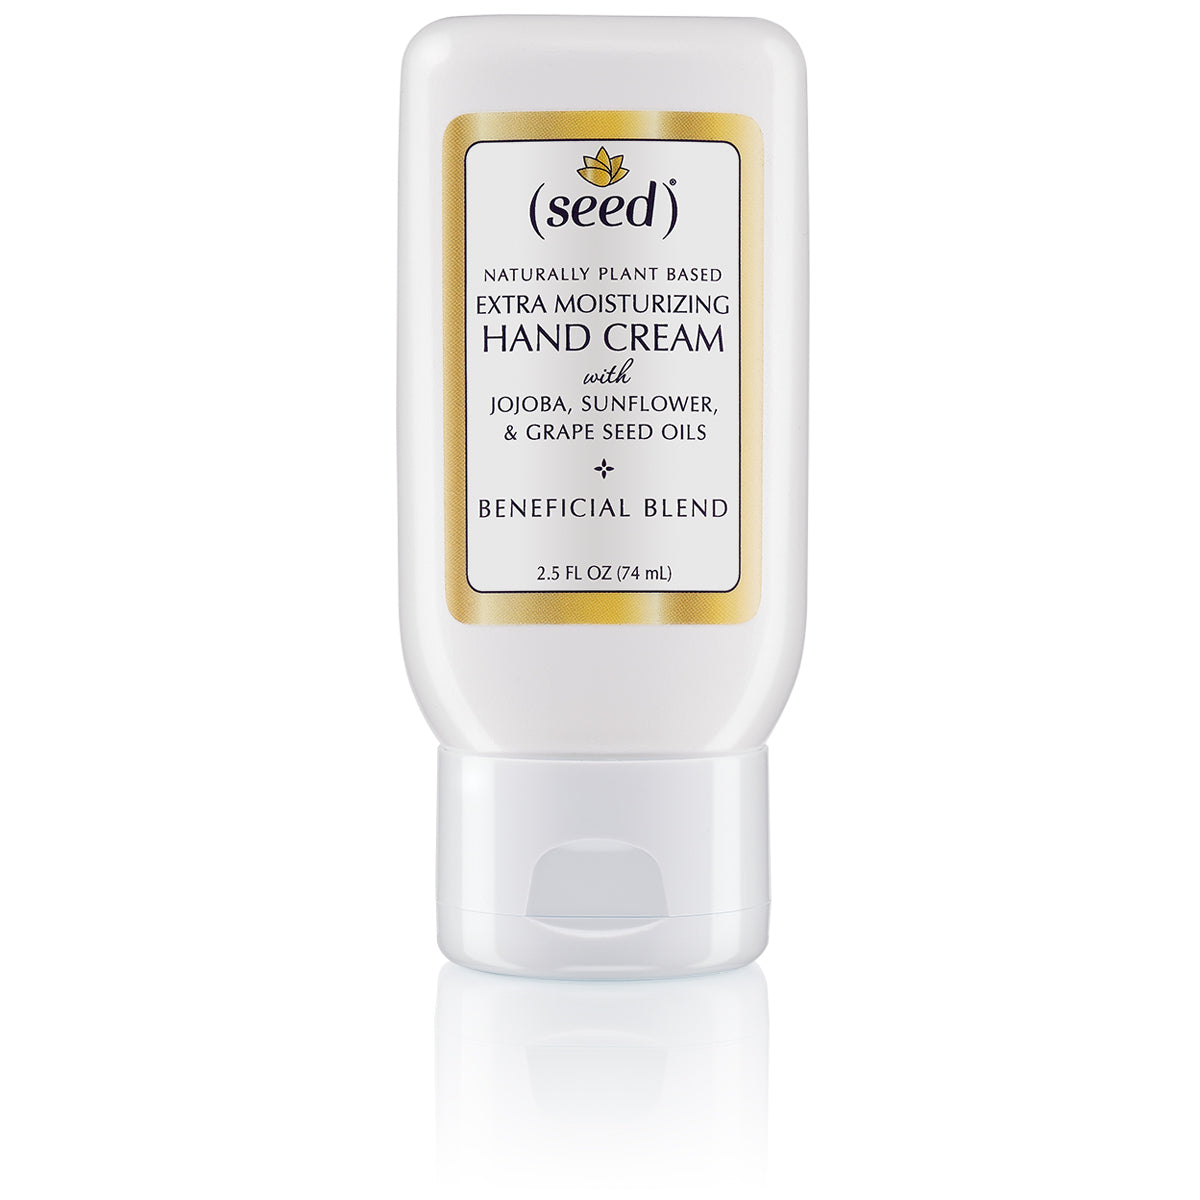 Seed Extra Moisturizing Hand Cream soothes, softens, protects, and holds up to frequent hand washing